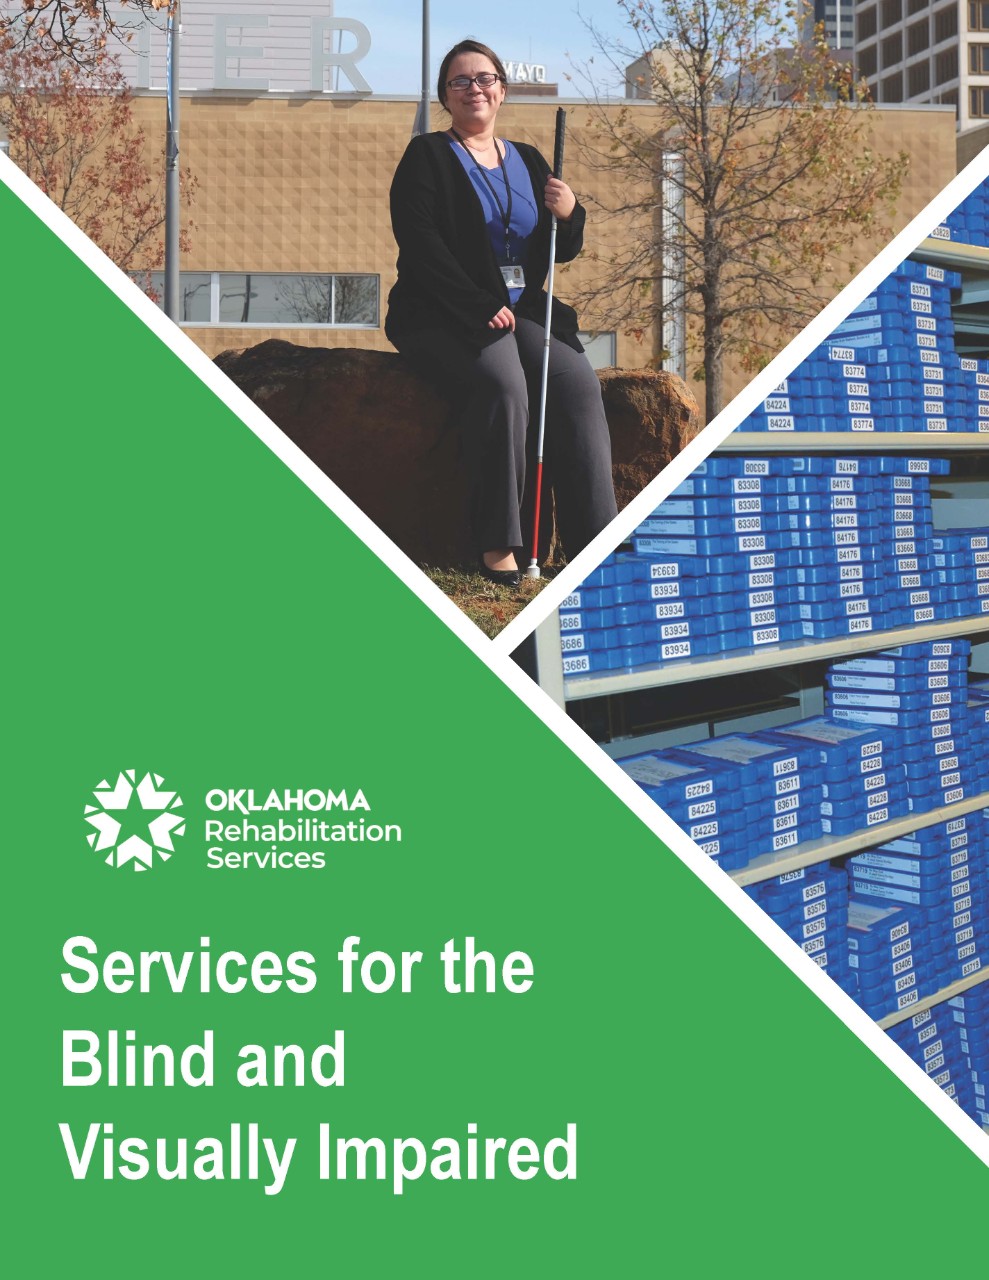 Services for the Blind and Visually Impaired front cover of the brochure